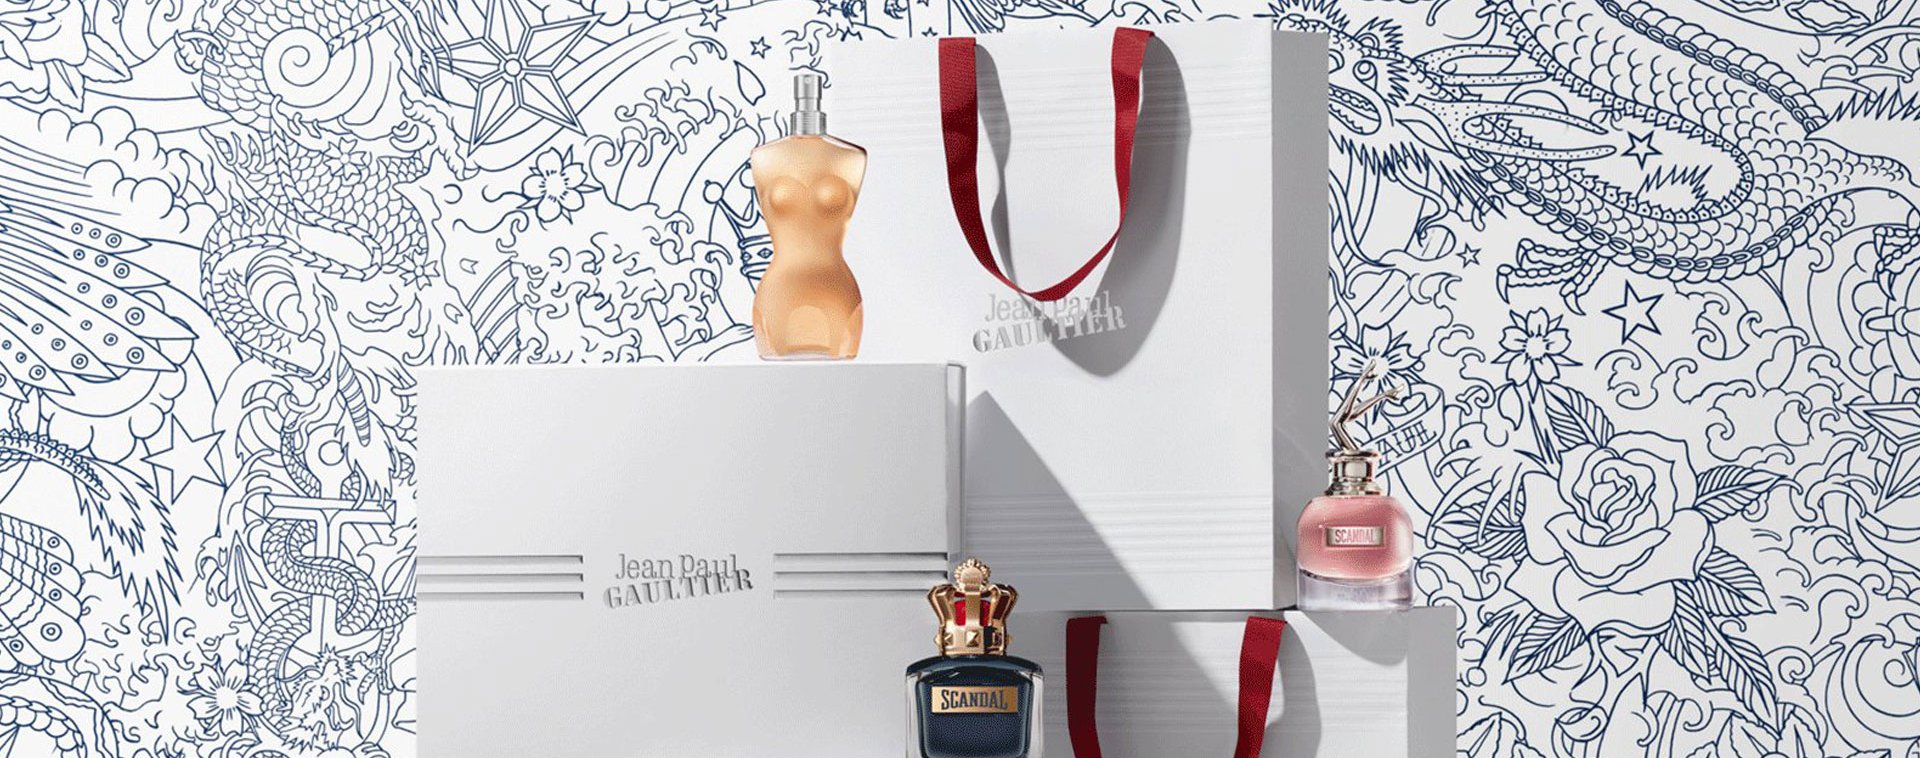 Gifts and fragrances as Value Proposition Header Visual